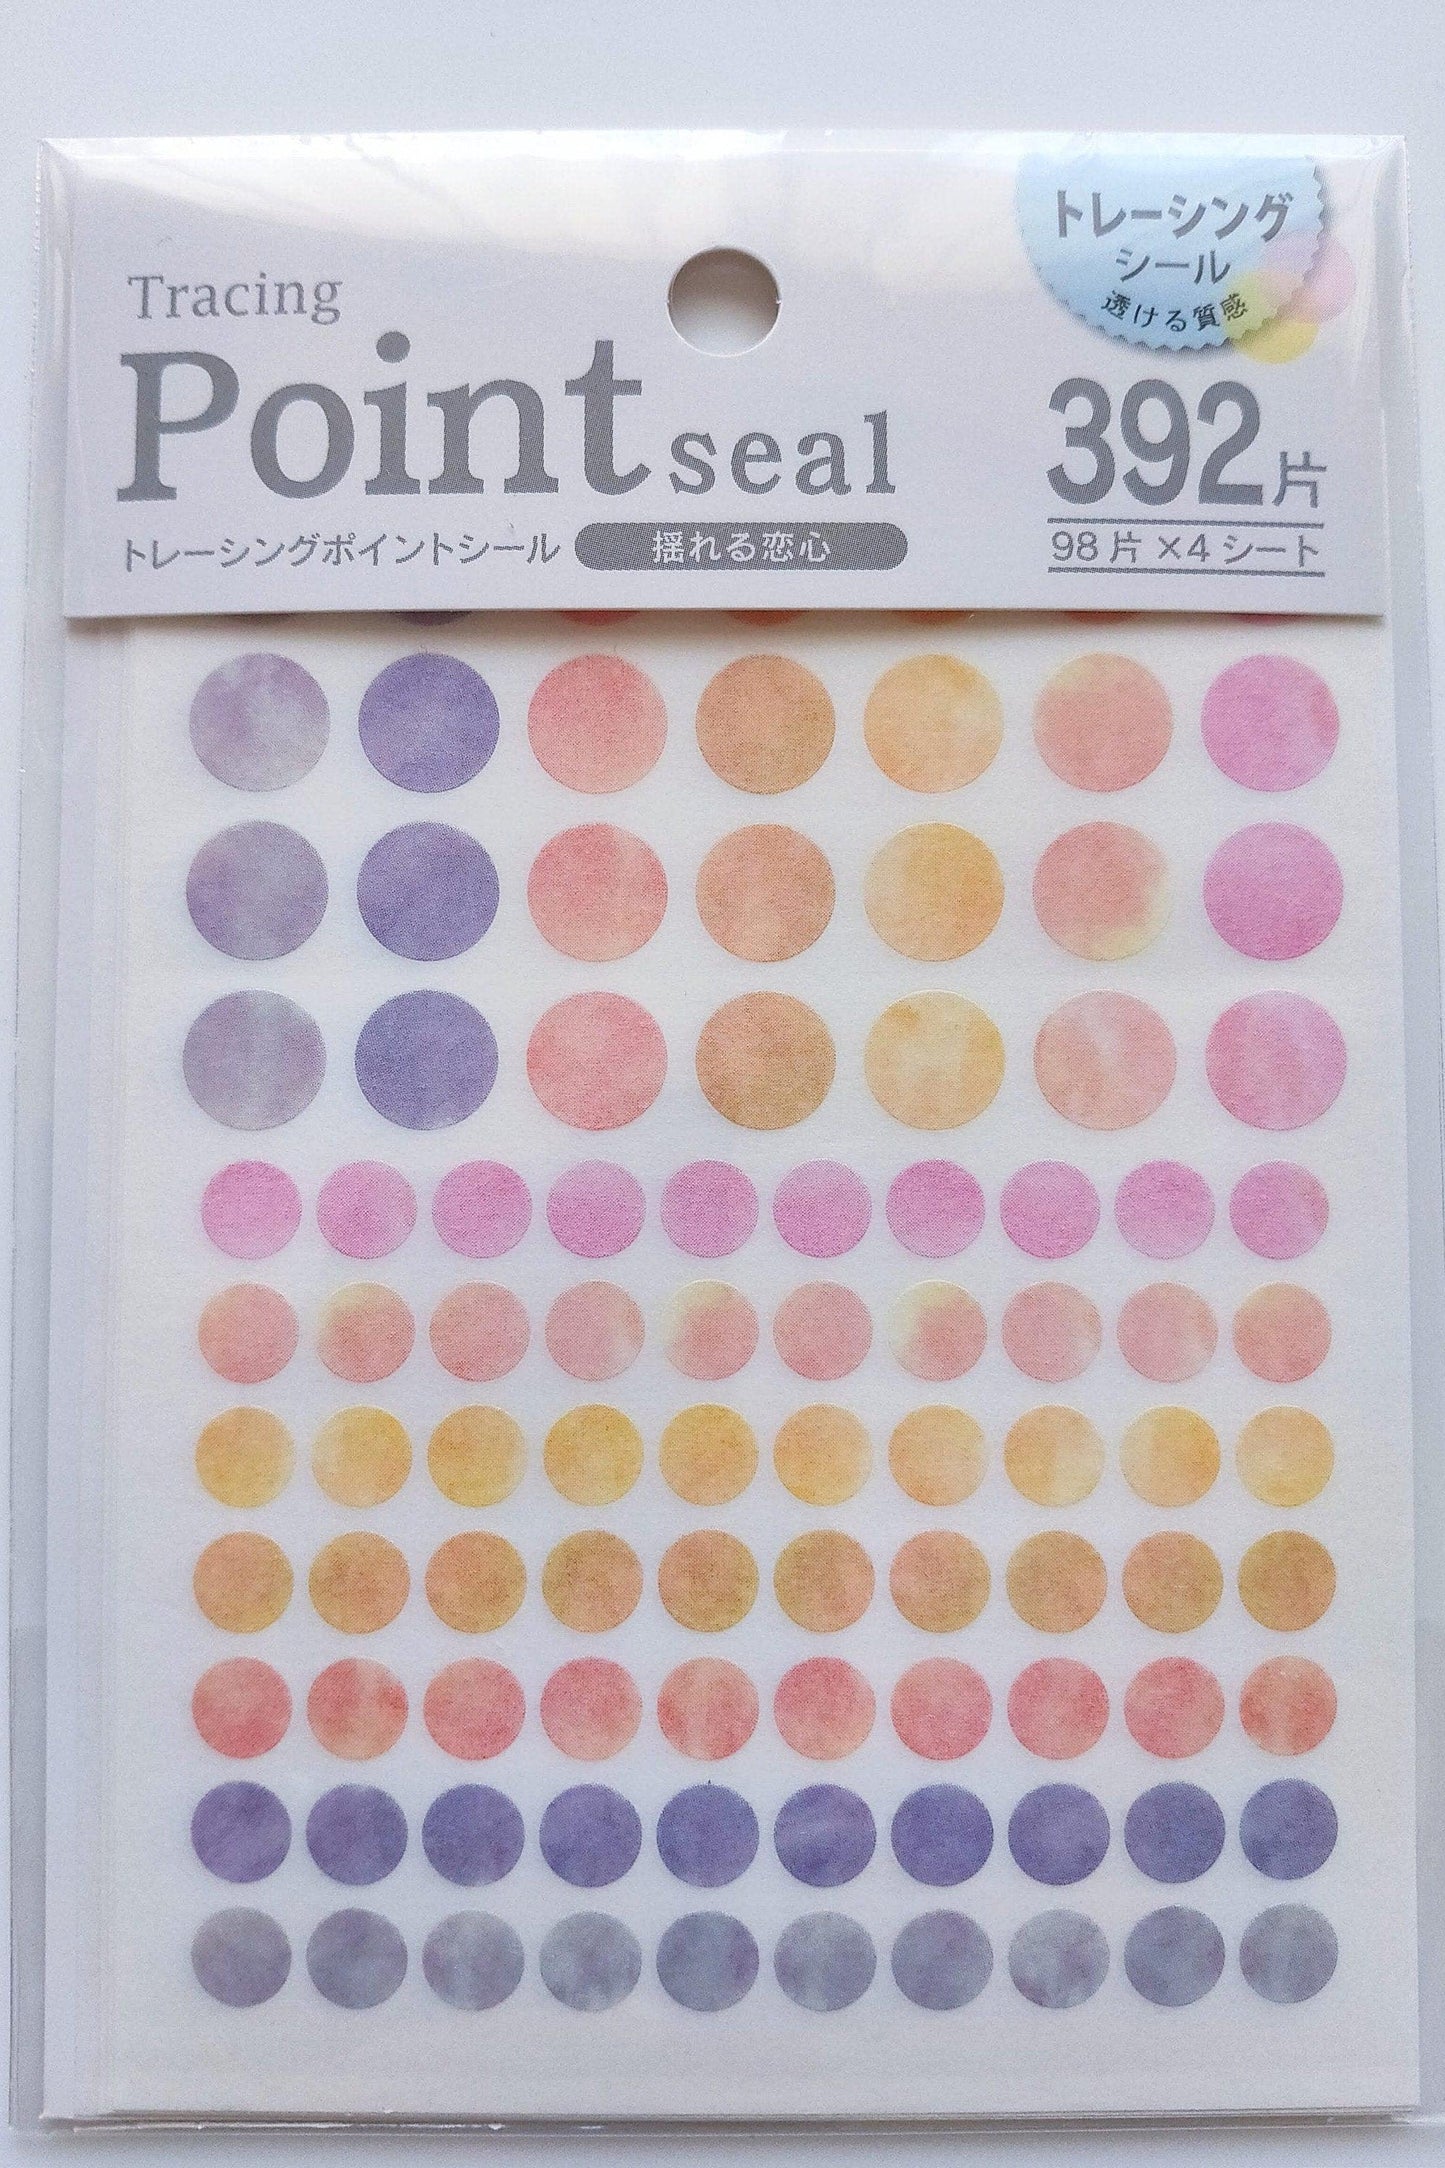 Point seal ,Kyowa_Red 140p /Small Red 392p /Blue 140p /Small Blue 392p